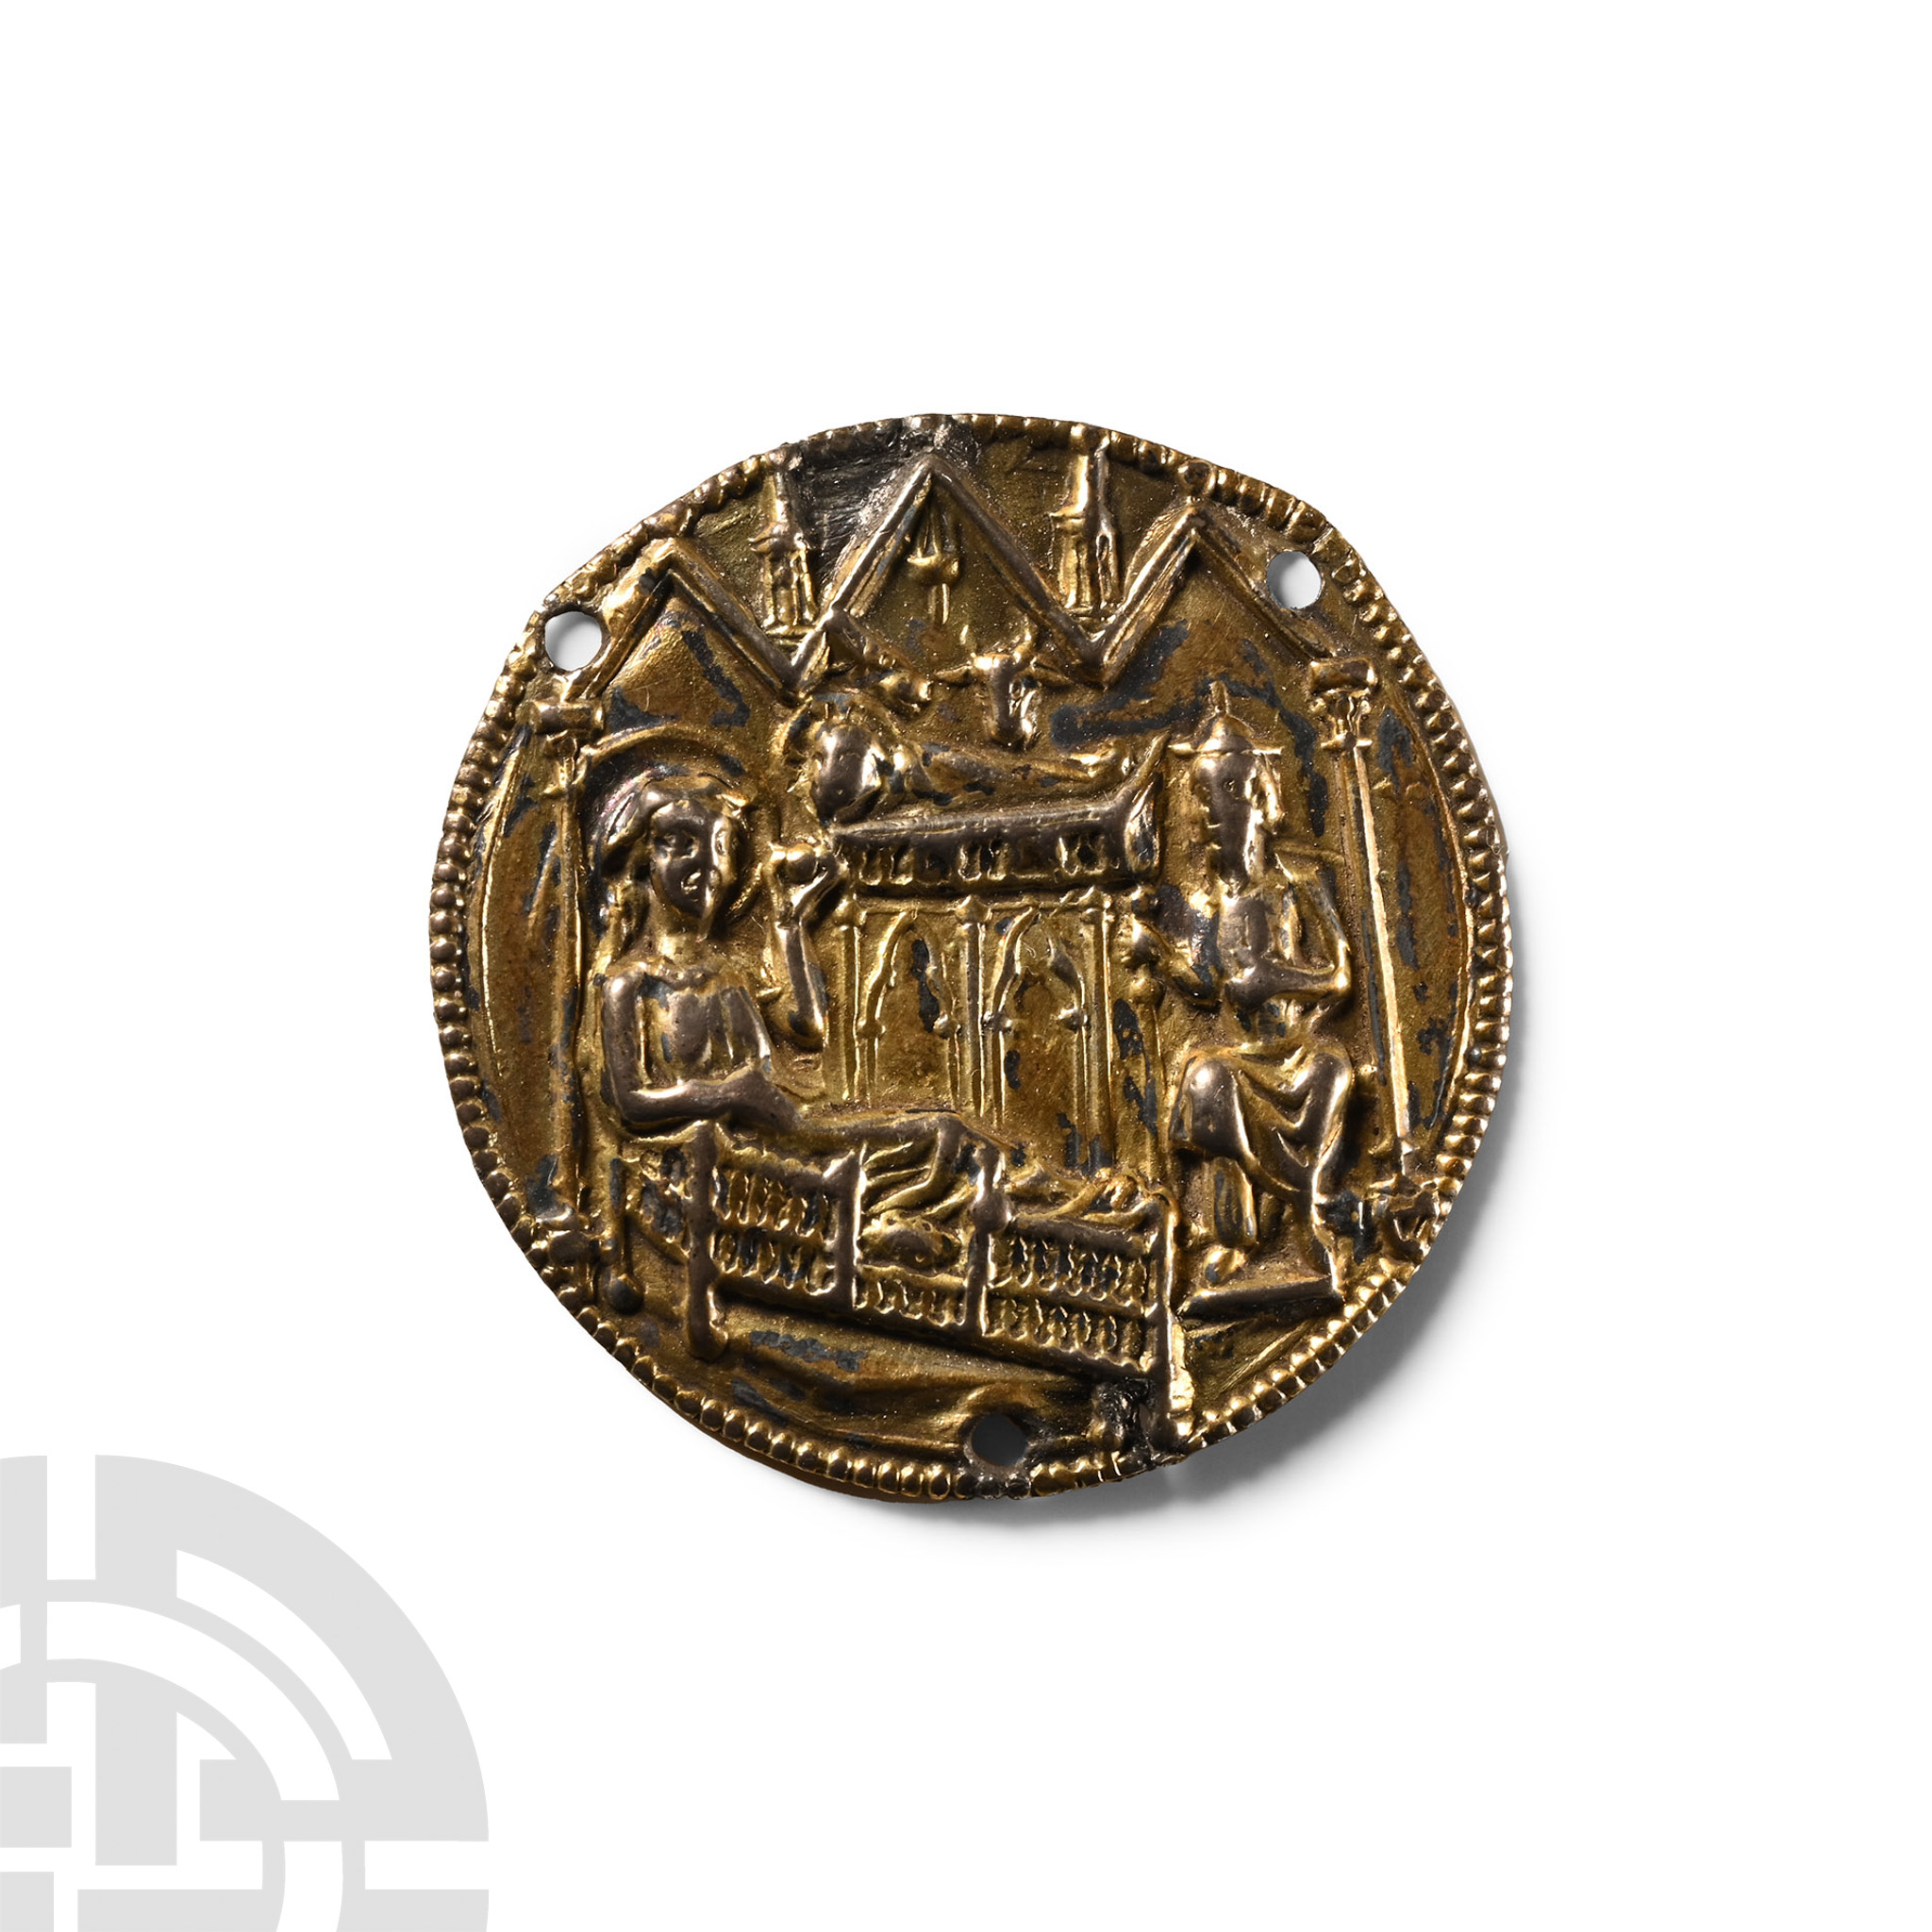 Medieval Silver Medallion with Scenes of the Nativity